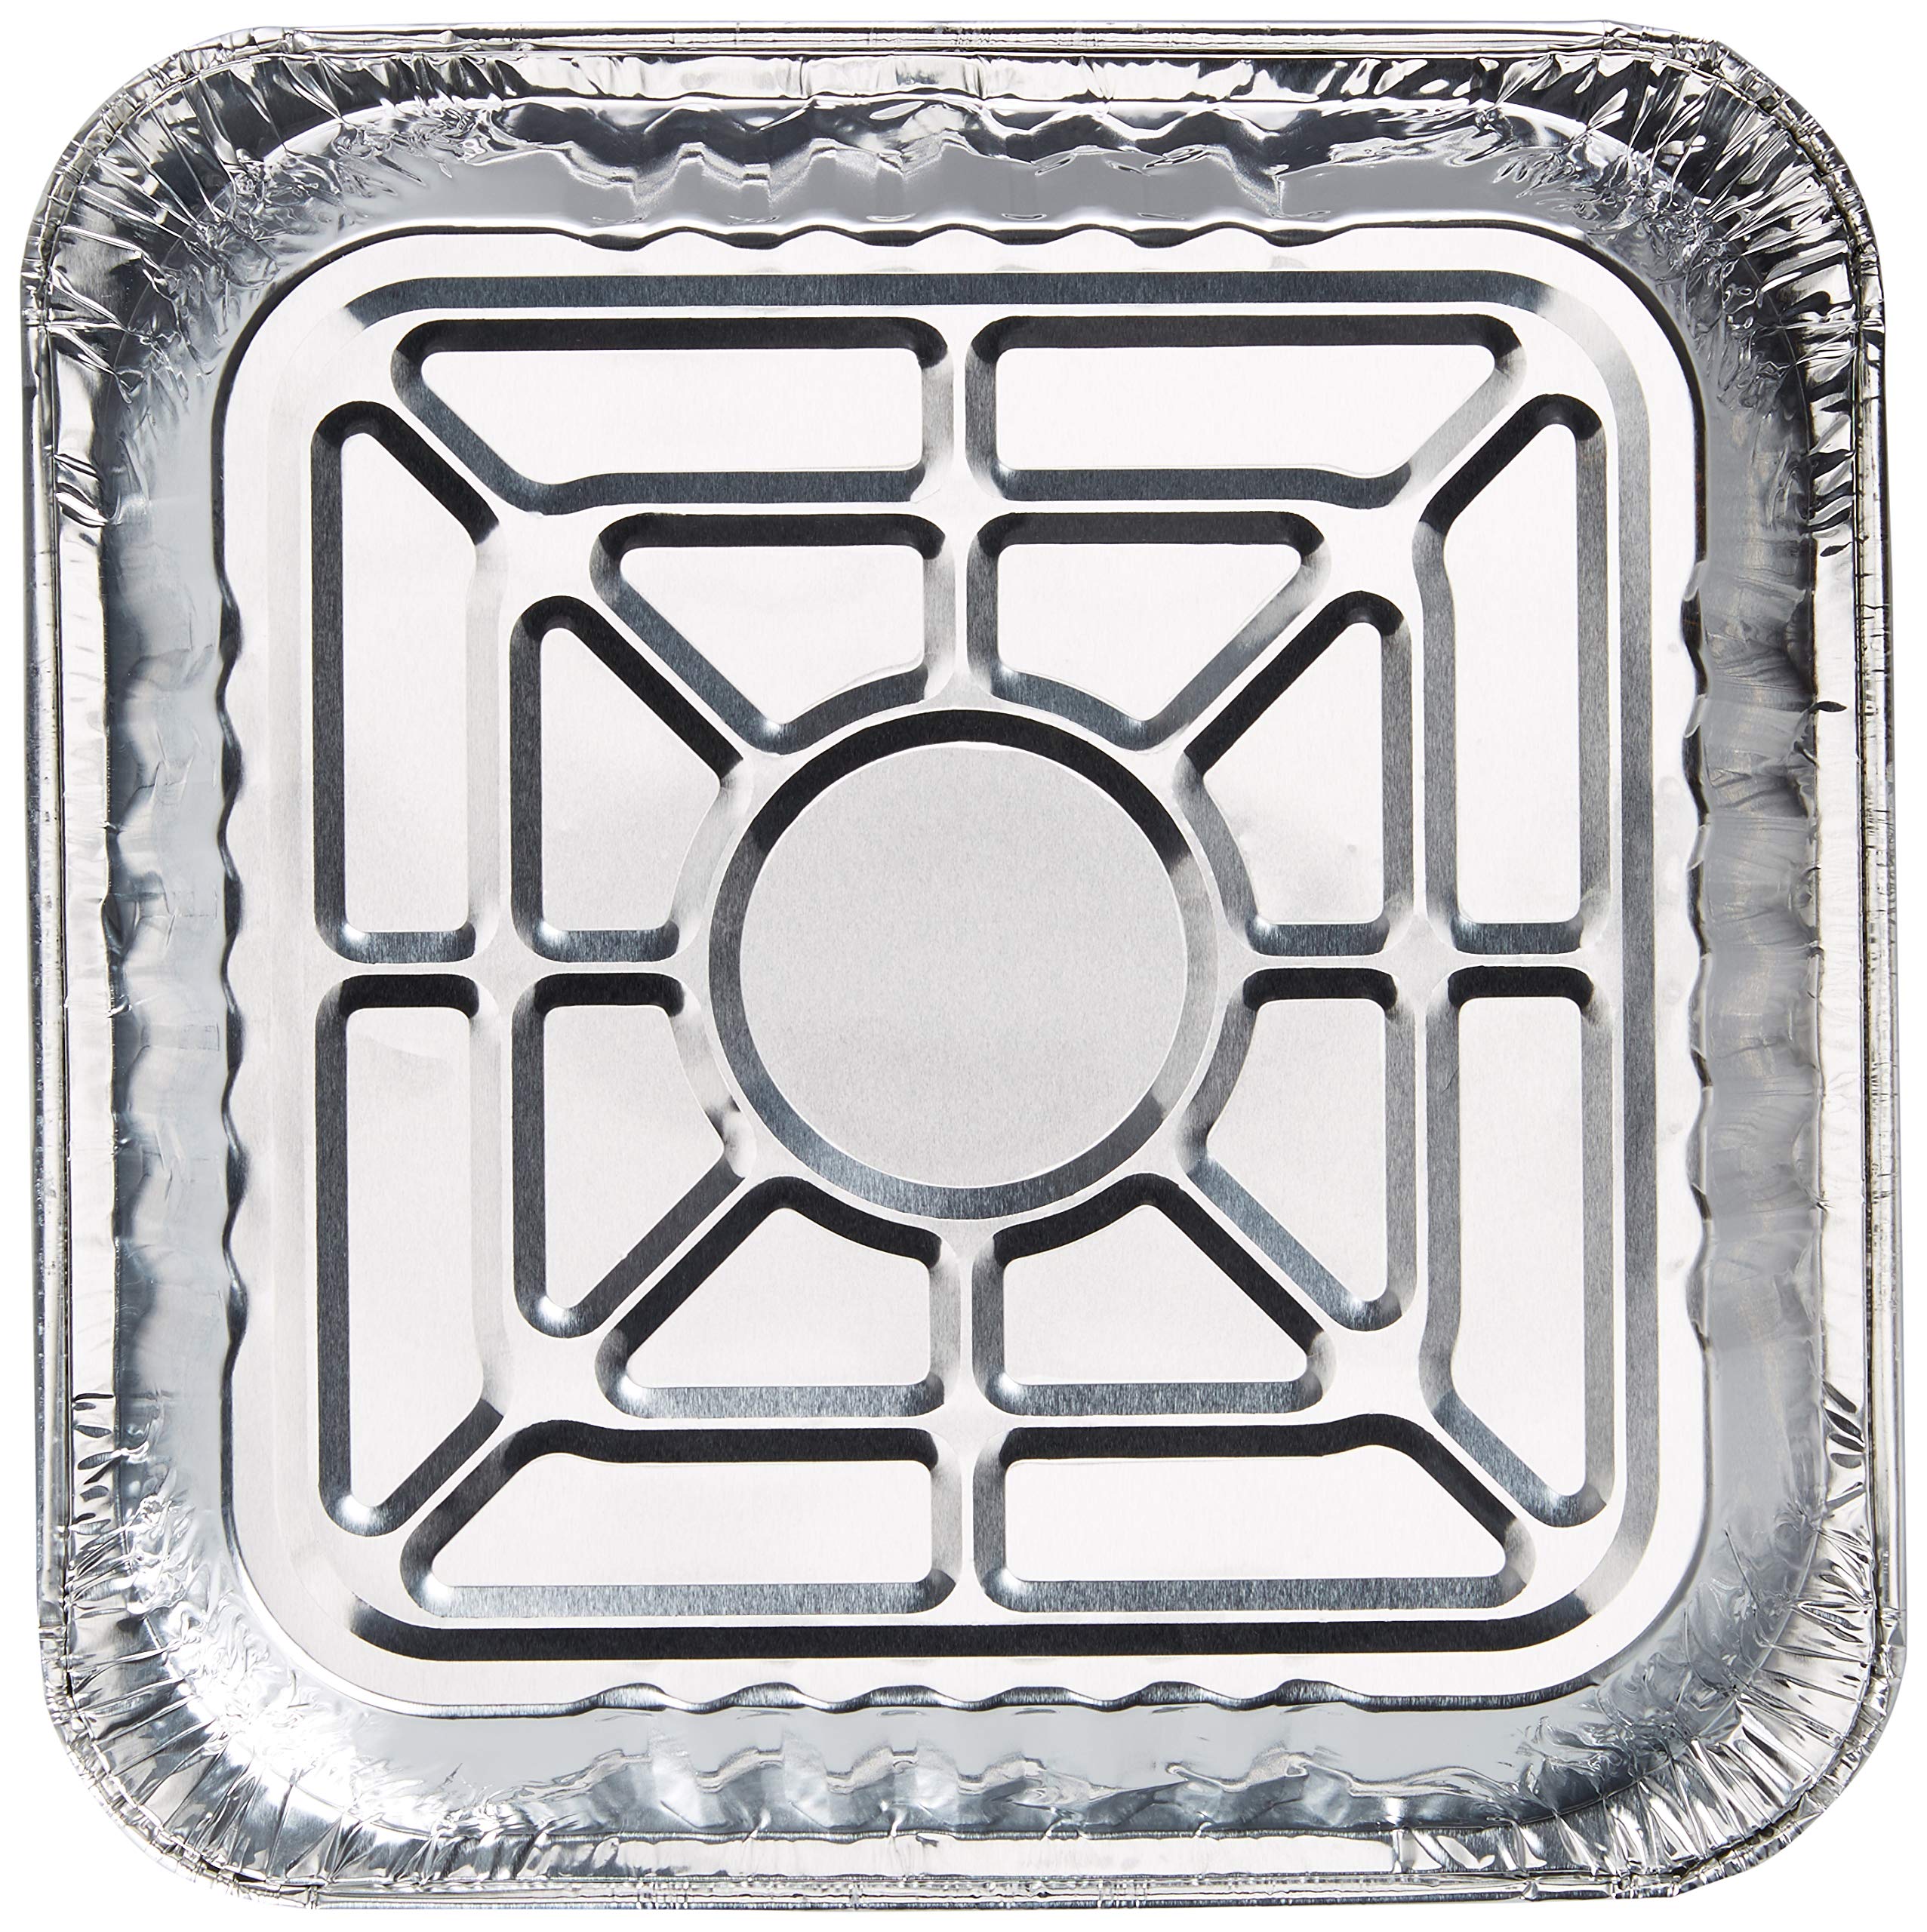 10" x 10" Strong Aluminum Square -Poultry- Baking Pans (Pack of 20) – Great For Transporting - Disposable Silver Foil Cooking Tins - Ideal for Poultry, Coffee Cakes,